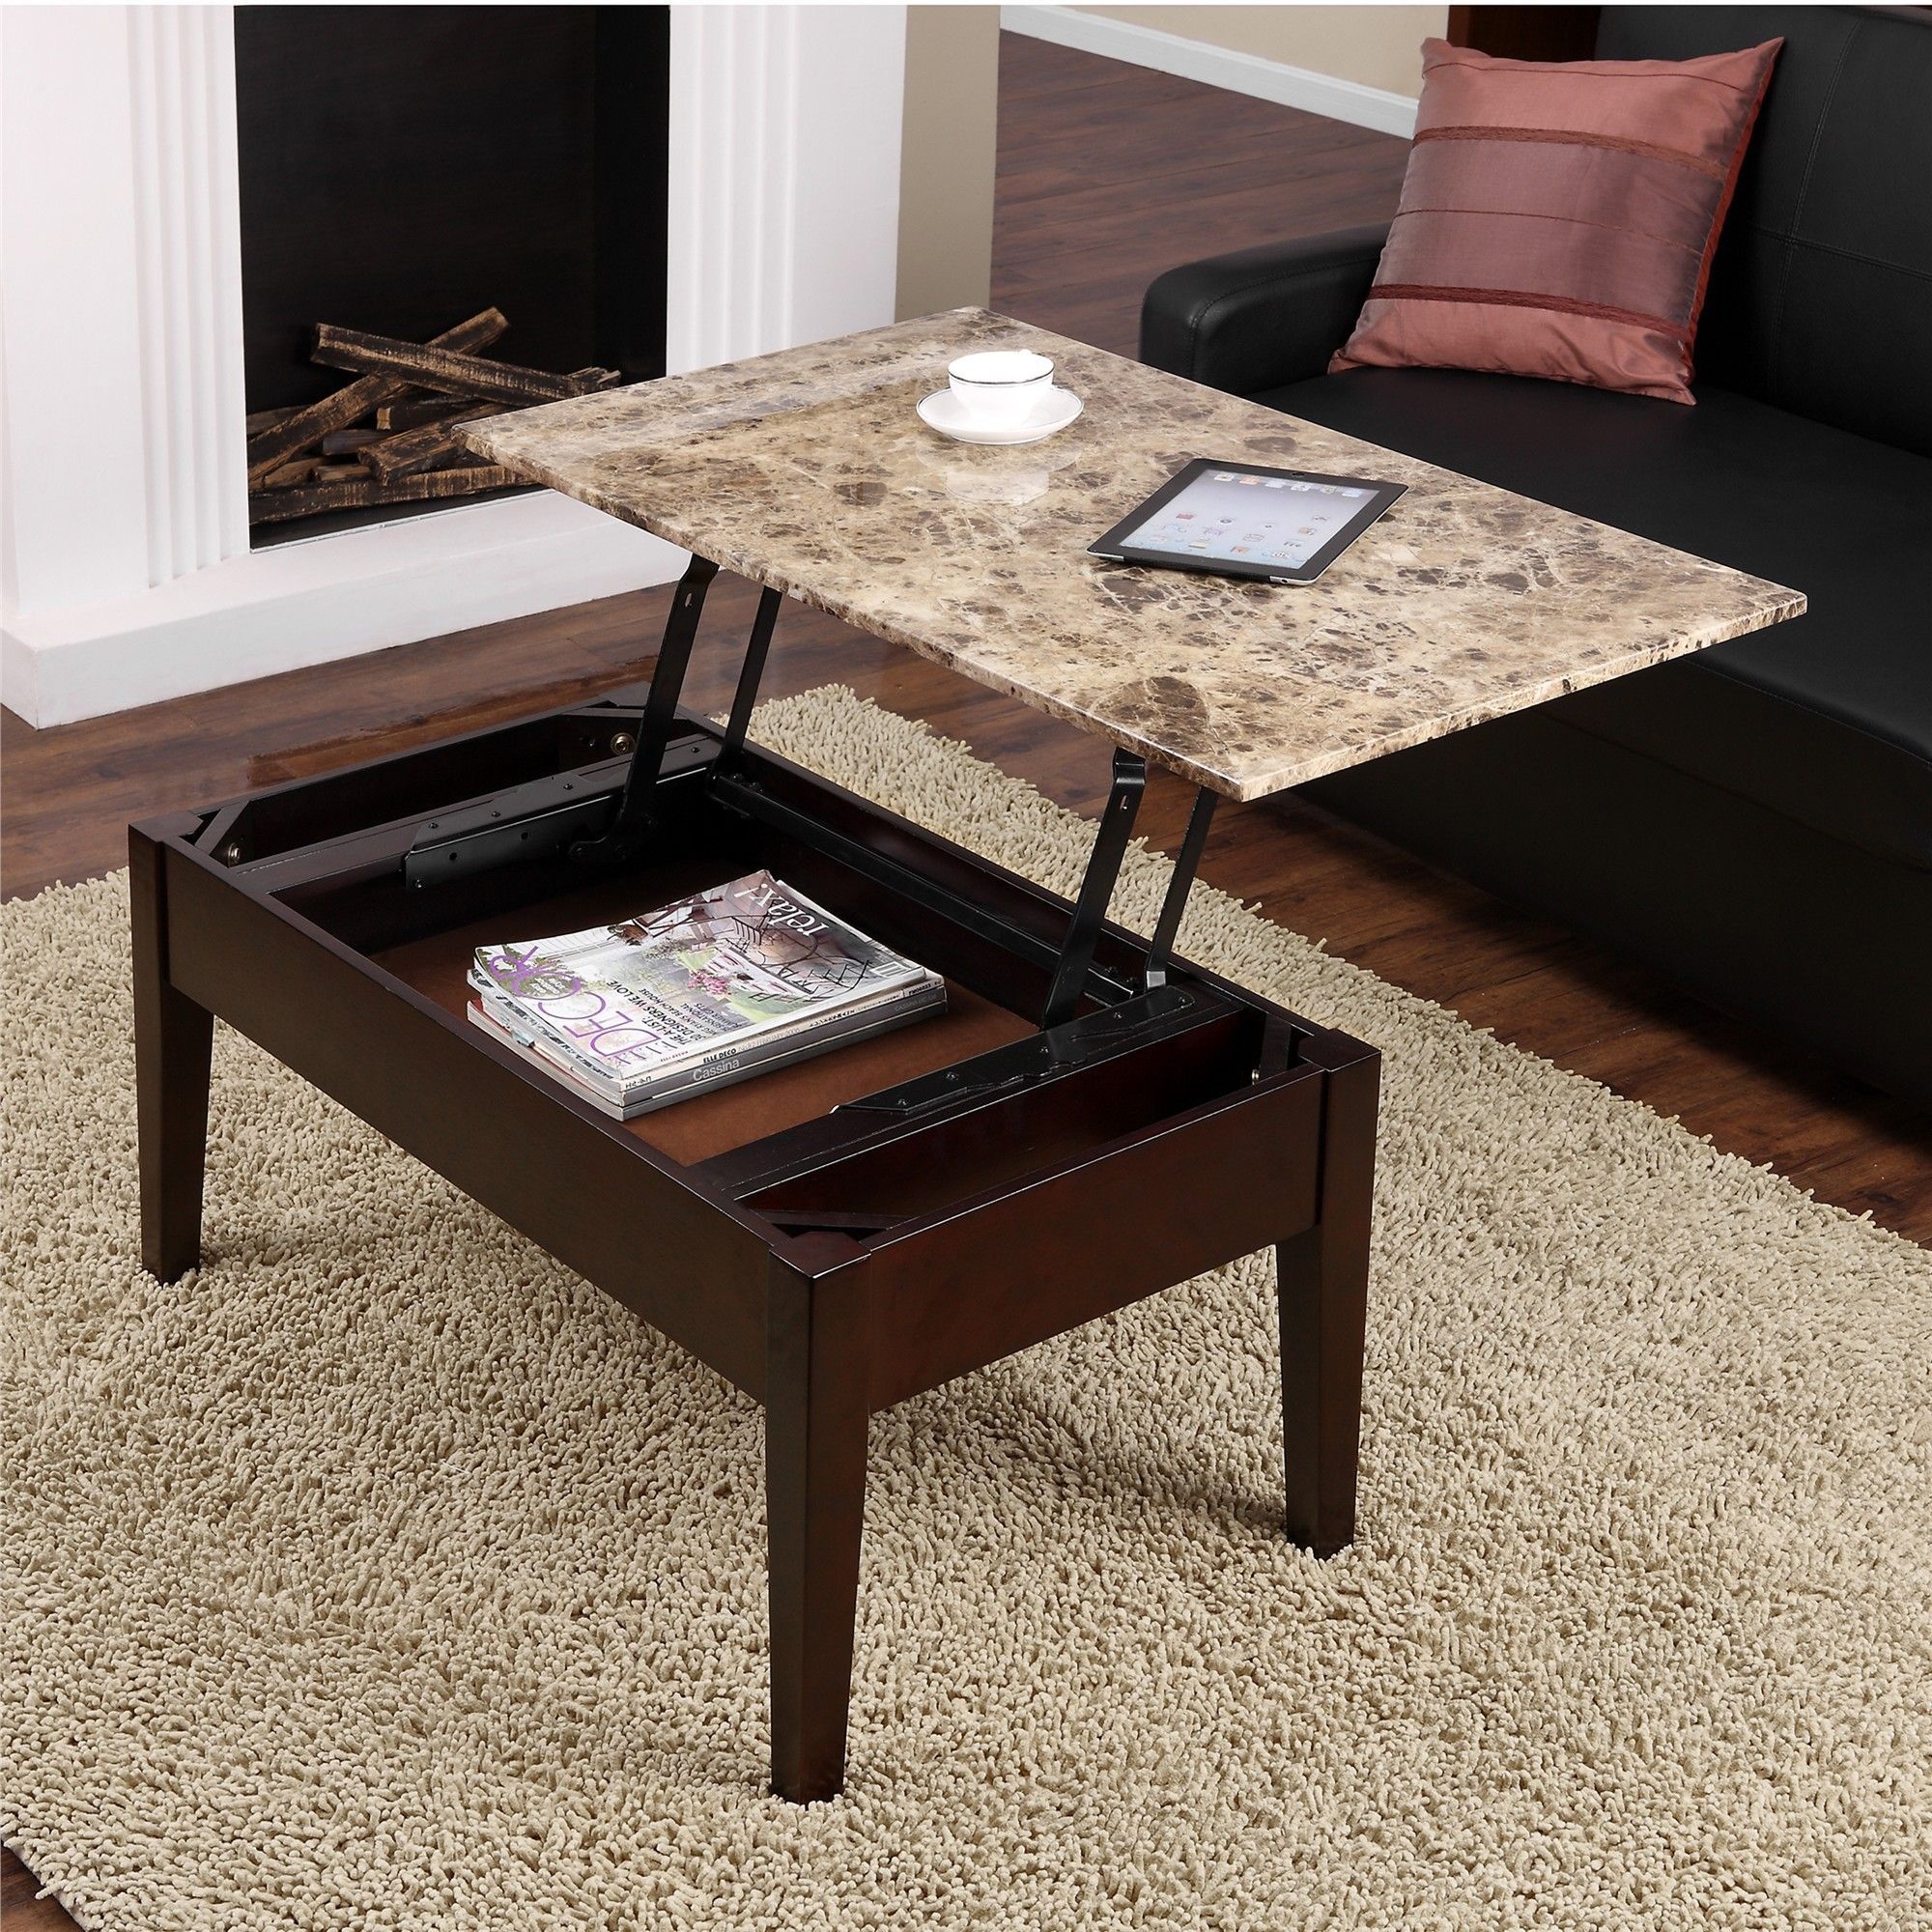 Dorel Living Faux Marble Lift Top Coffee Table – – 11190142 | Coffee In High Gloss Lift Top Coffee Tables (Gallery 16 of 21)